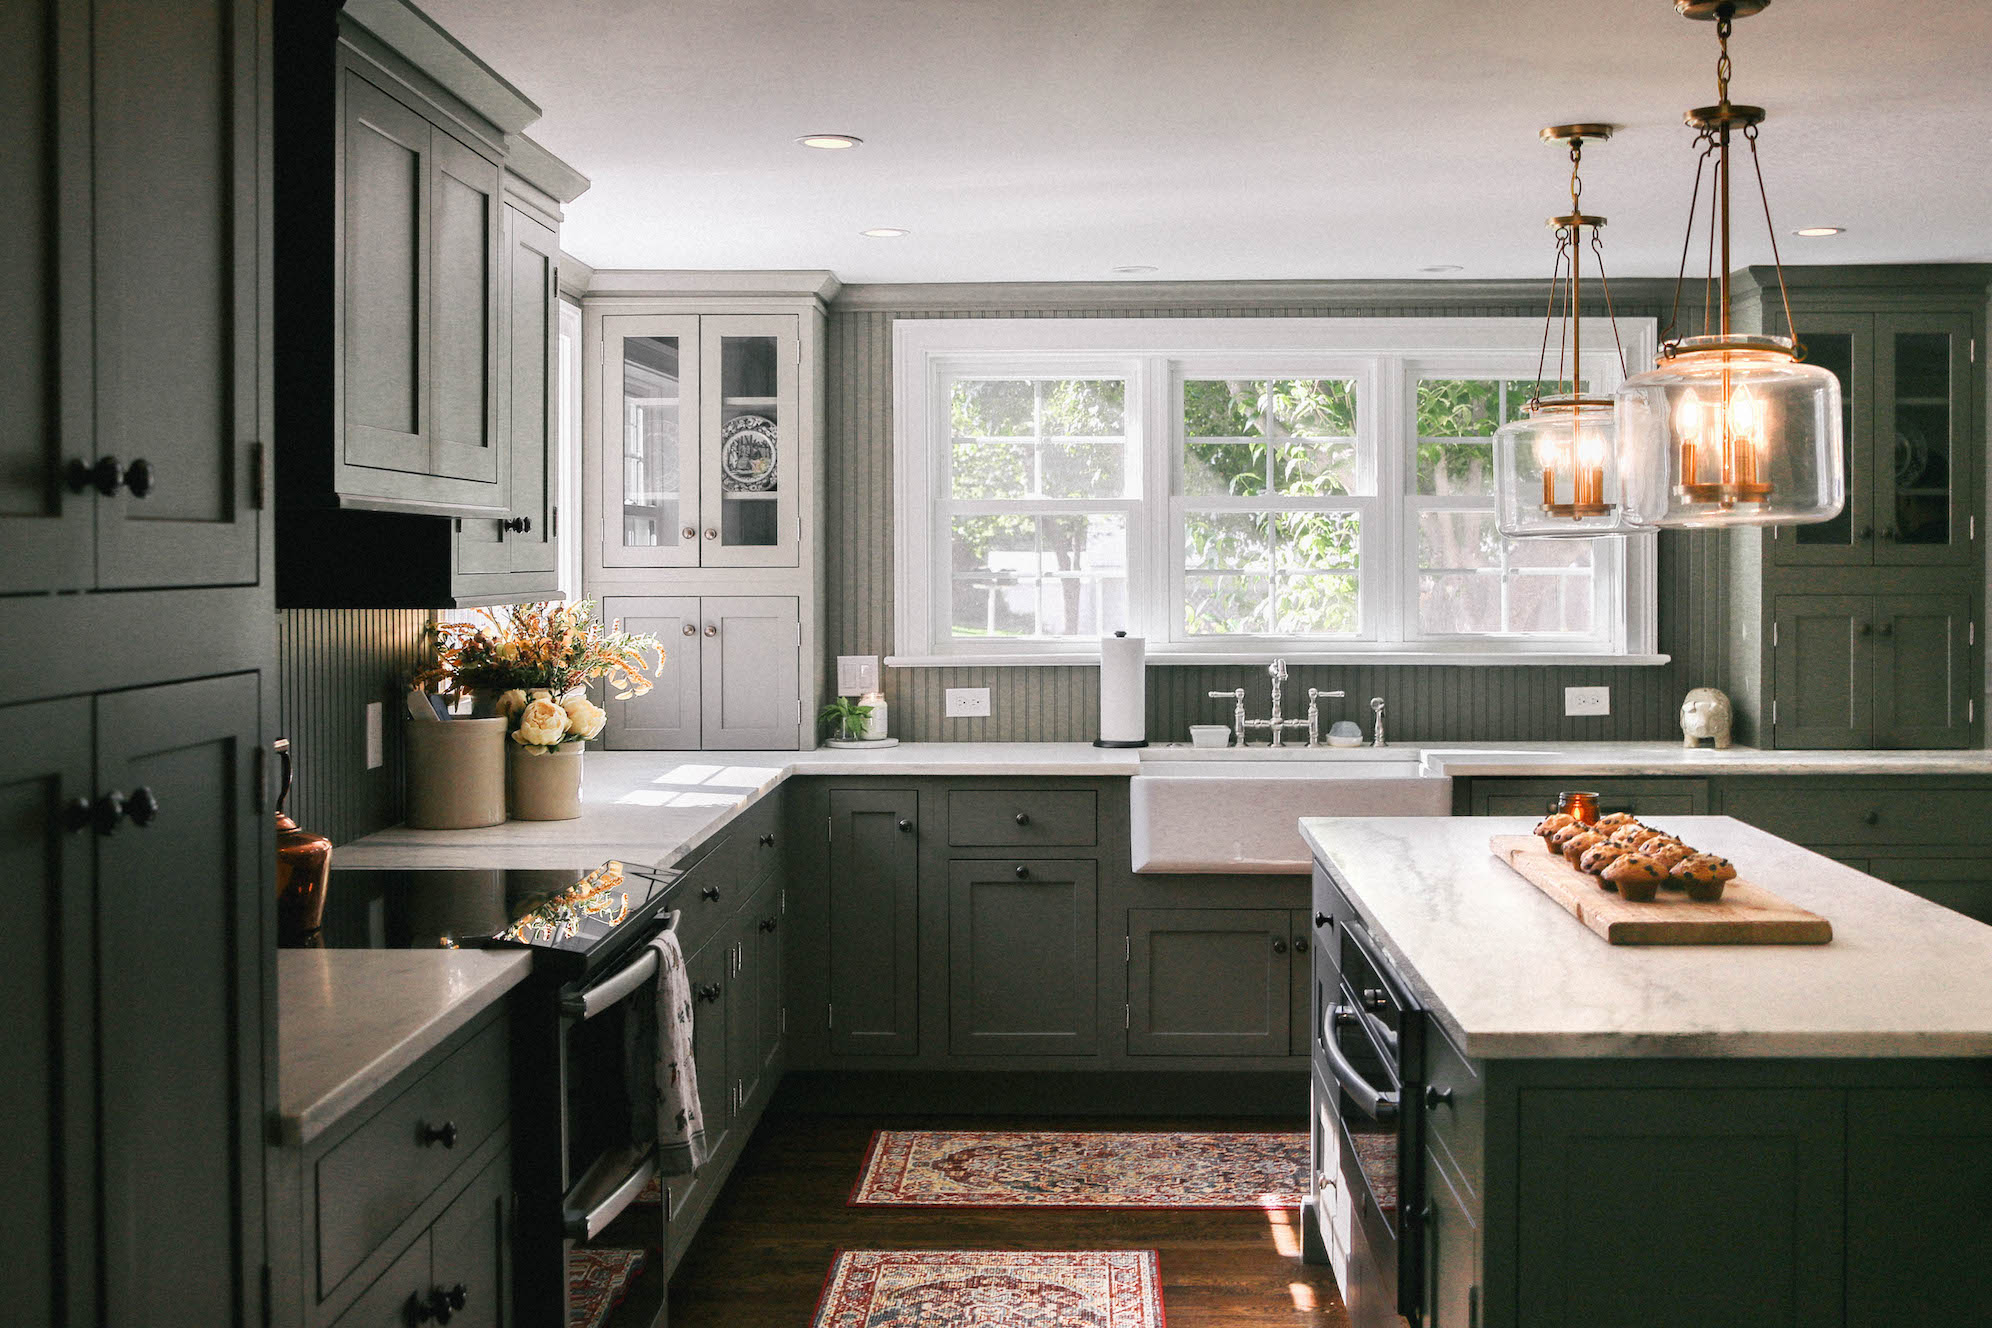 Before & After: Colonial Kitchen Reveal The Coastal Confidence by Aubrey Yandow